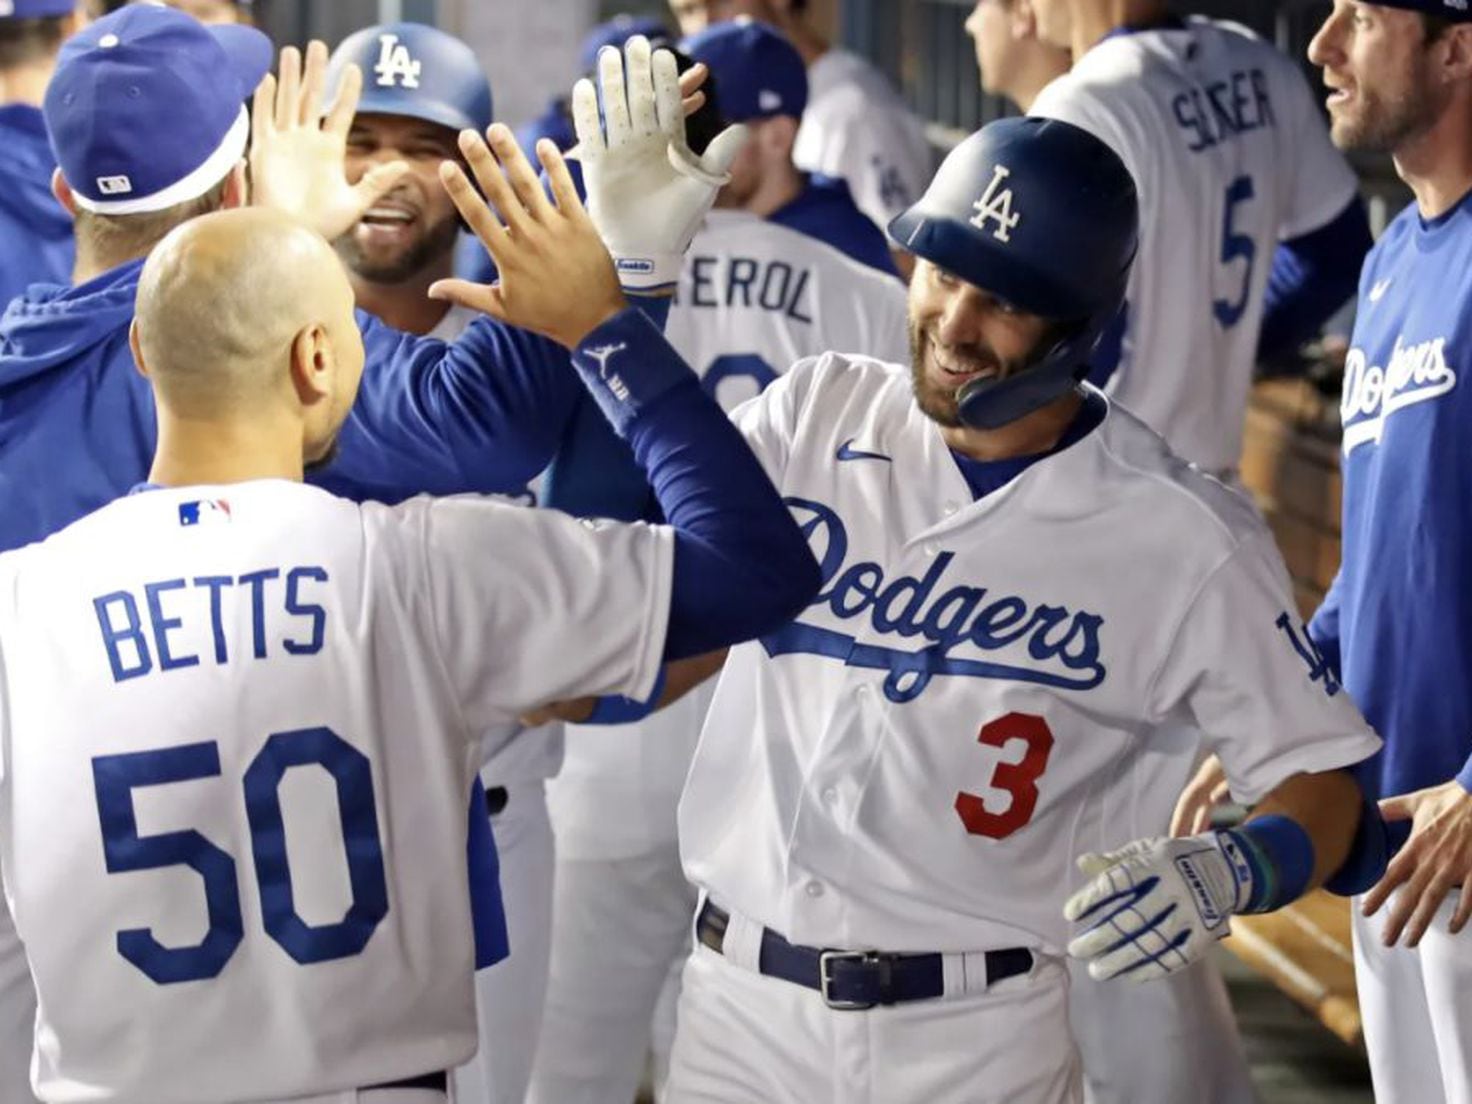 Red Sox, Dodgers gear up for what should be epic World Series